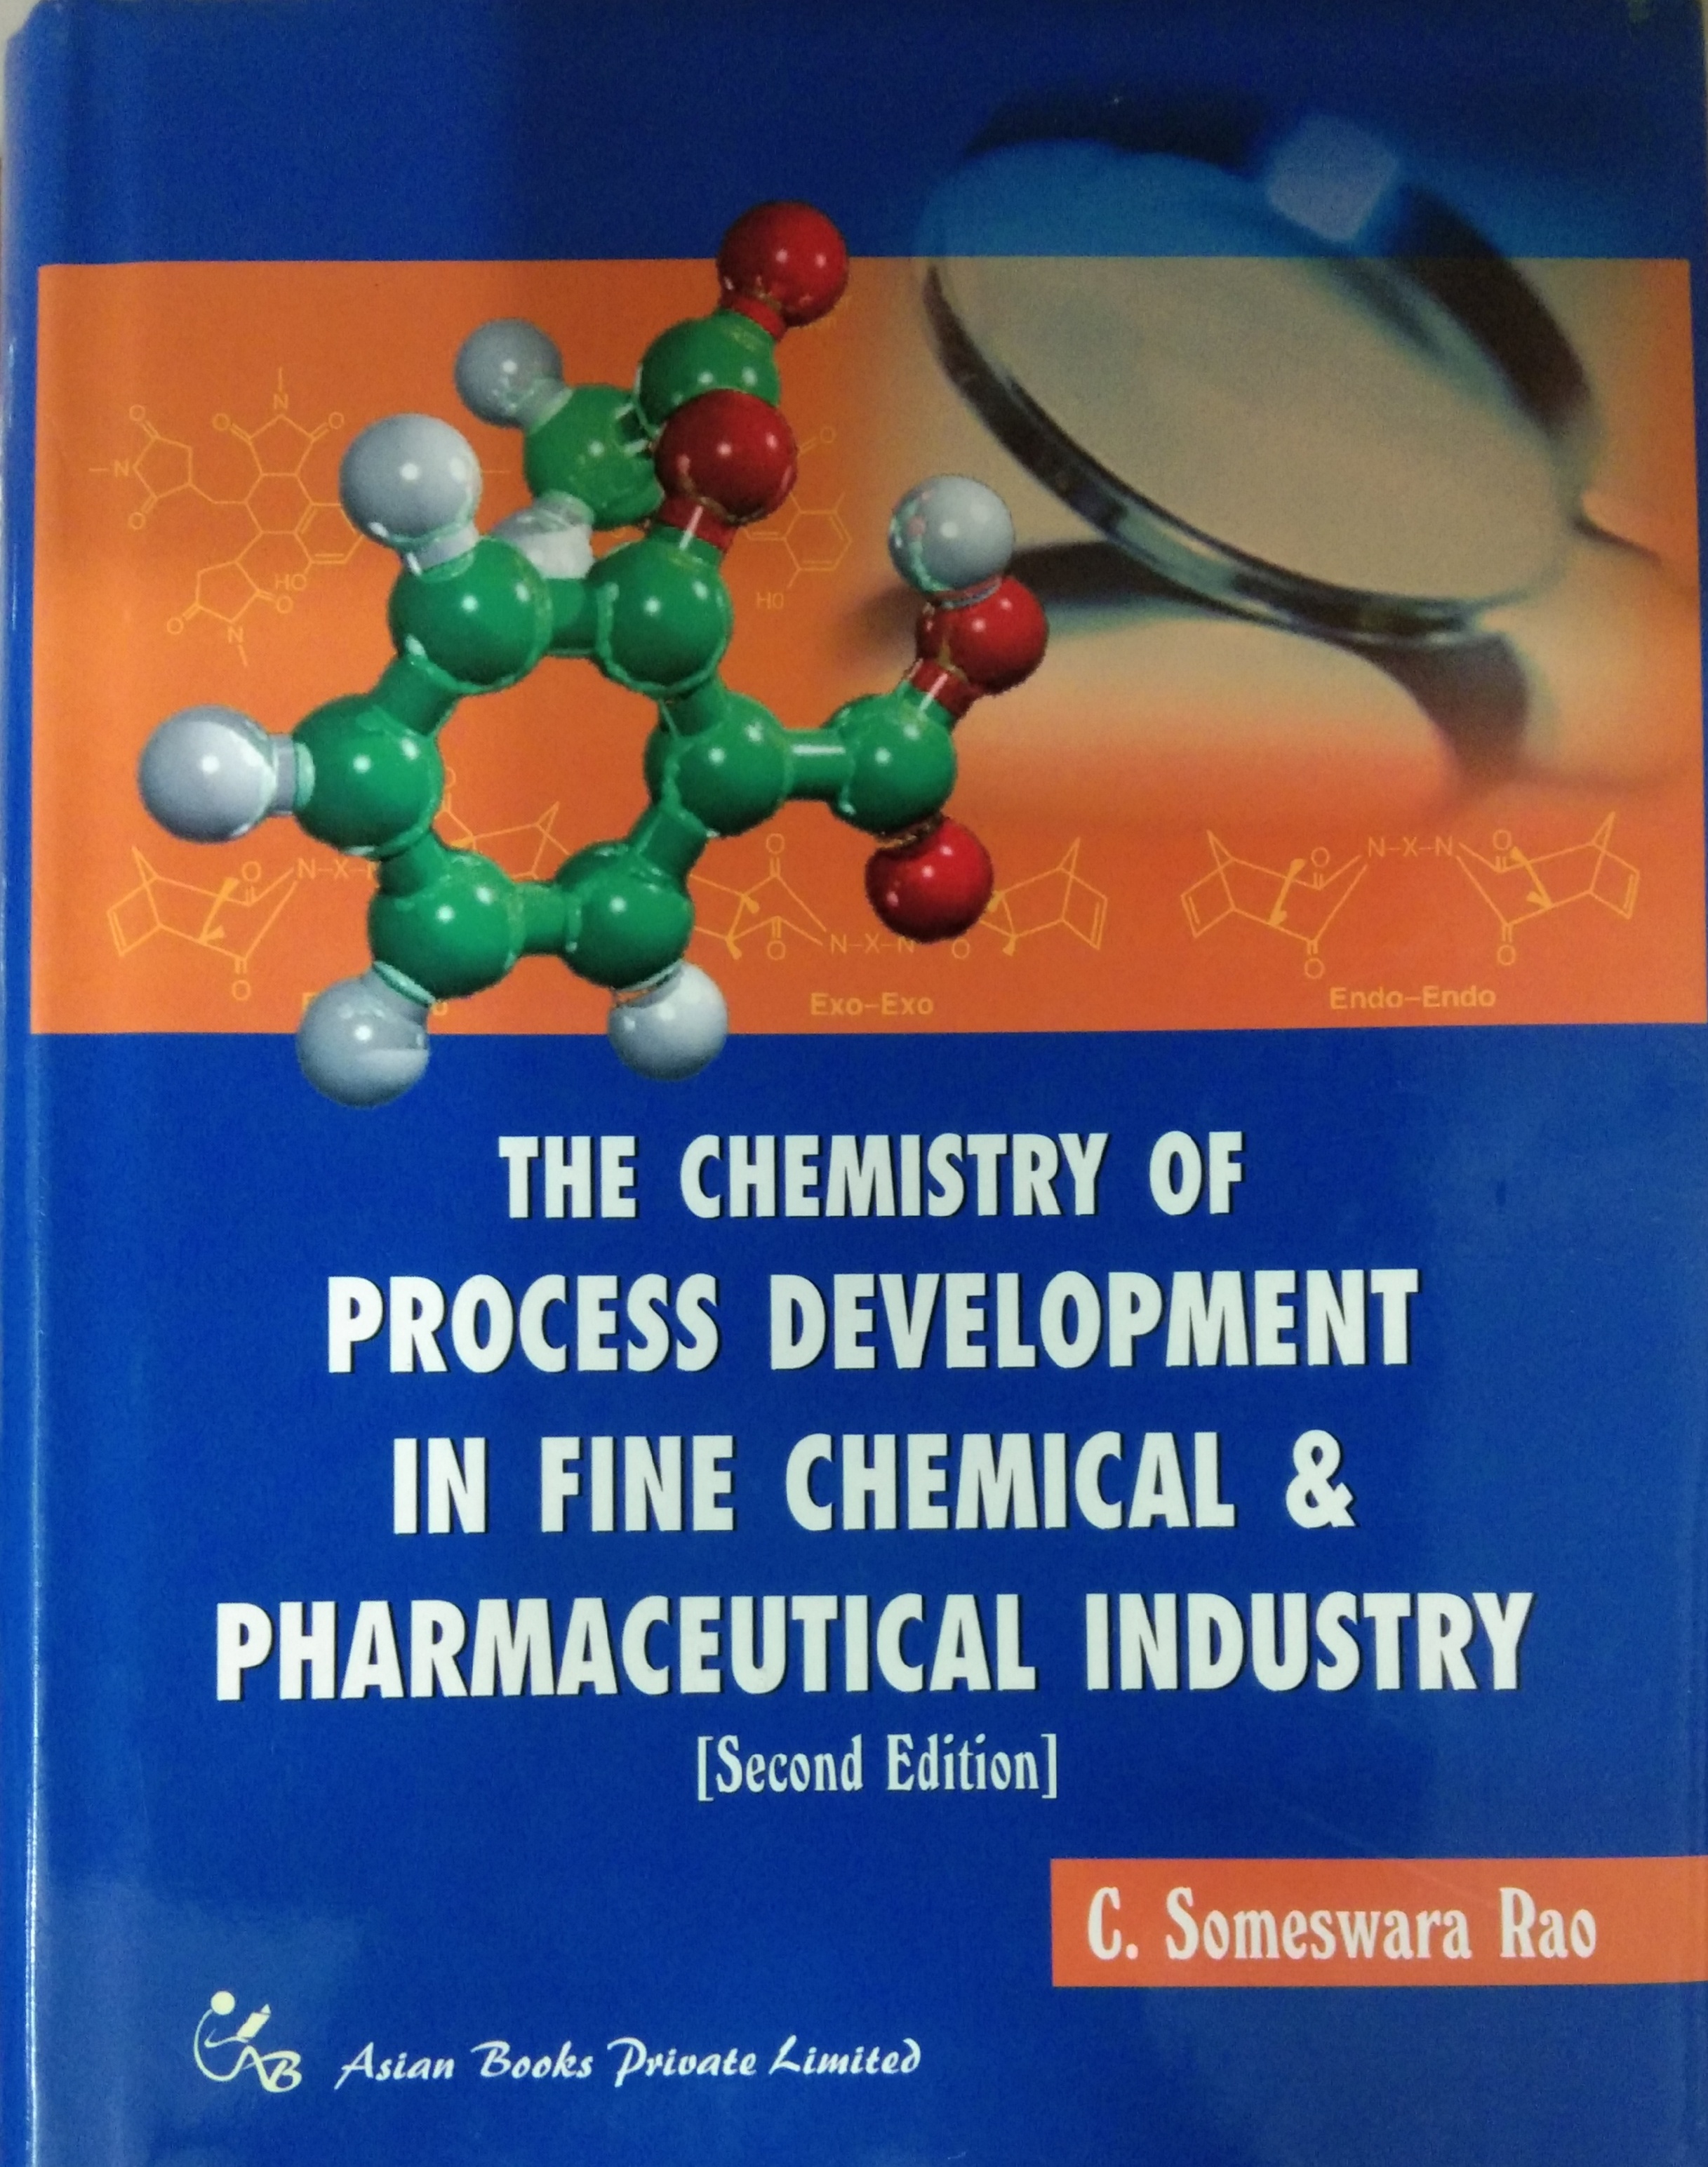 THE CHEMISTRY OF PROCESS DEVELOPMENT IN FINE CHEMICAL & PHARMACEUTICAL INDUSTRY